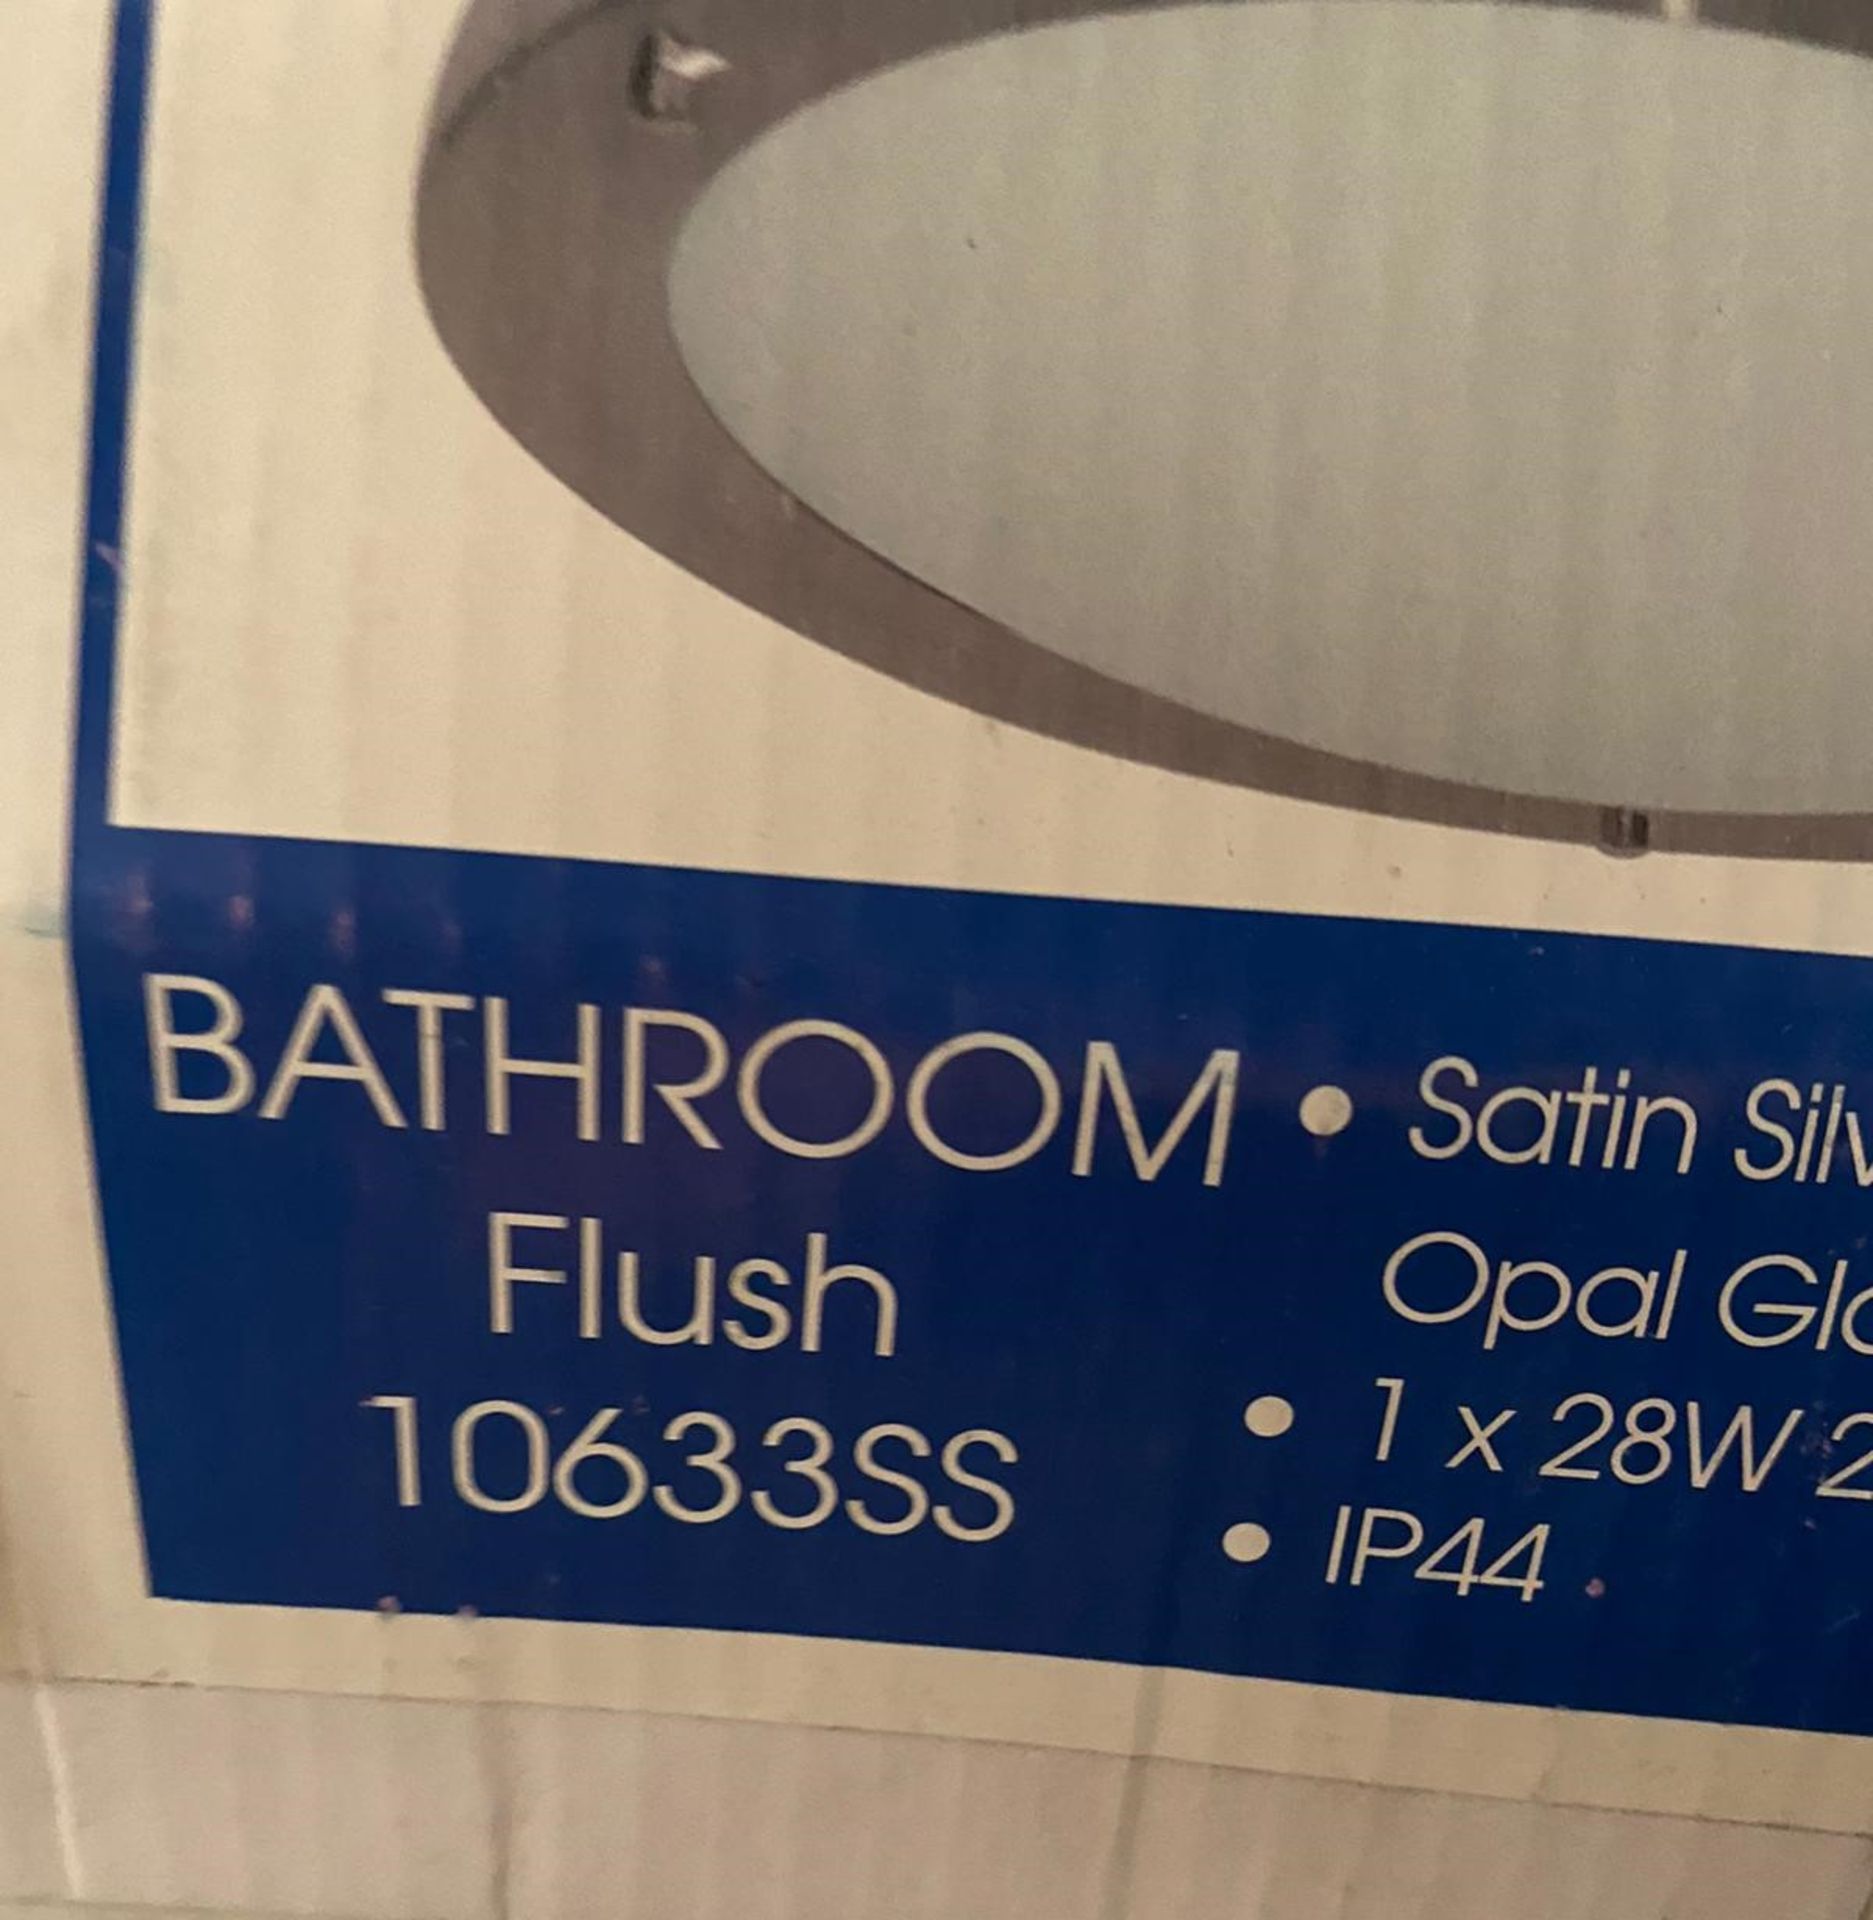 1 x Searchlight bathroom Flush in a satin silver finish - Ref: 10632SS - New and Boxed - RRP: £60.00 - Image 2 of 4